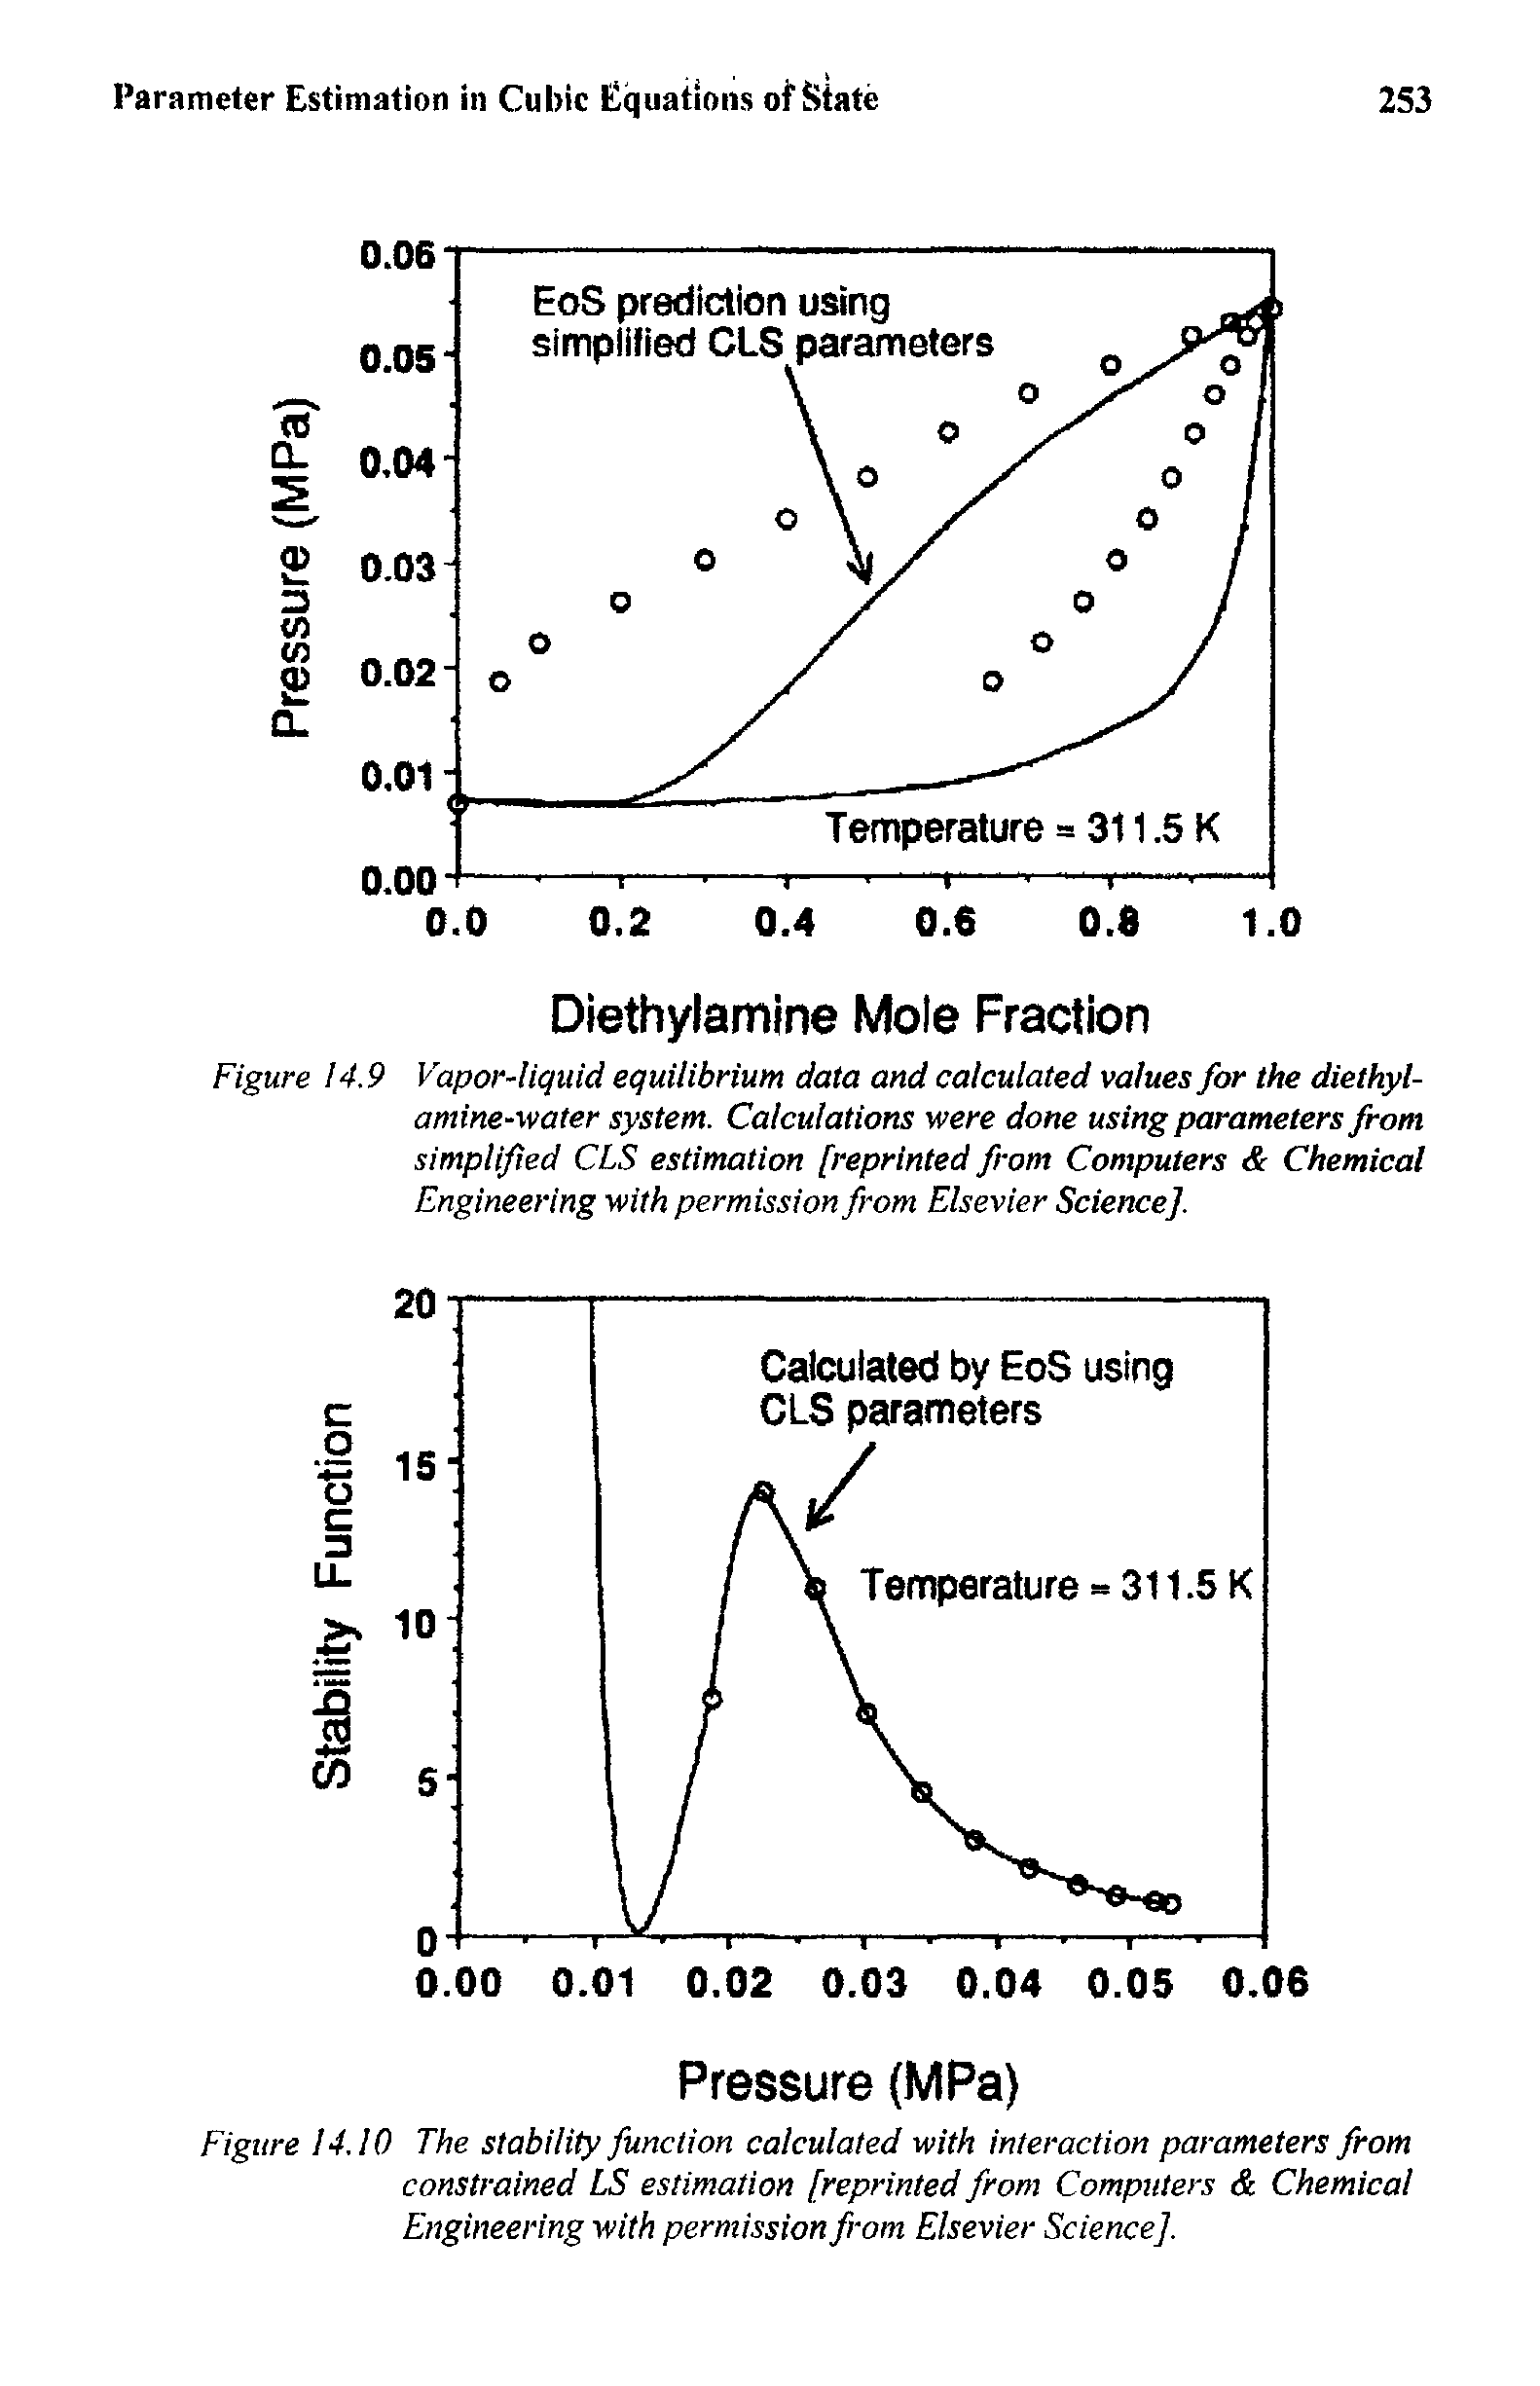 Figure 14.10 The stability function calculated with interaction parameters from constrained LS estimation [reprinted from Computers Chemical Engineering with permission from Elsevier Science],...